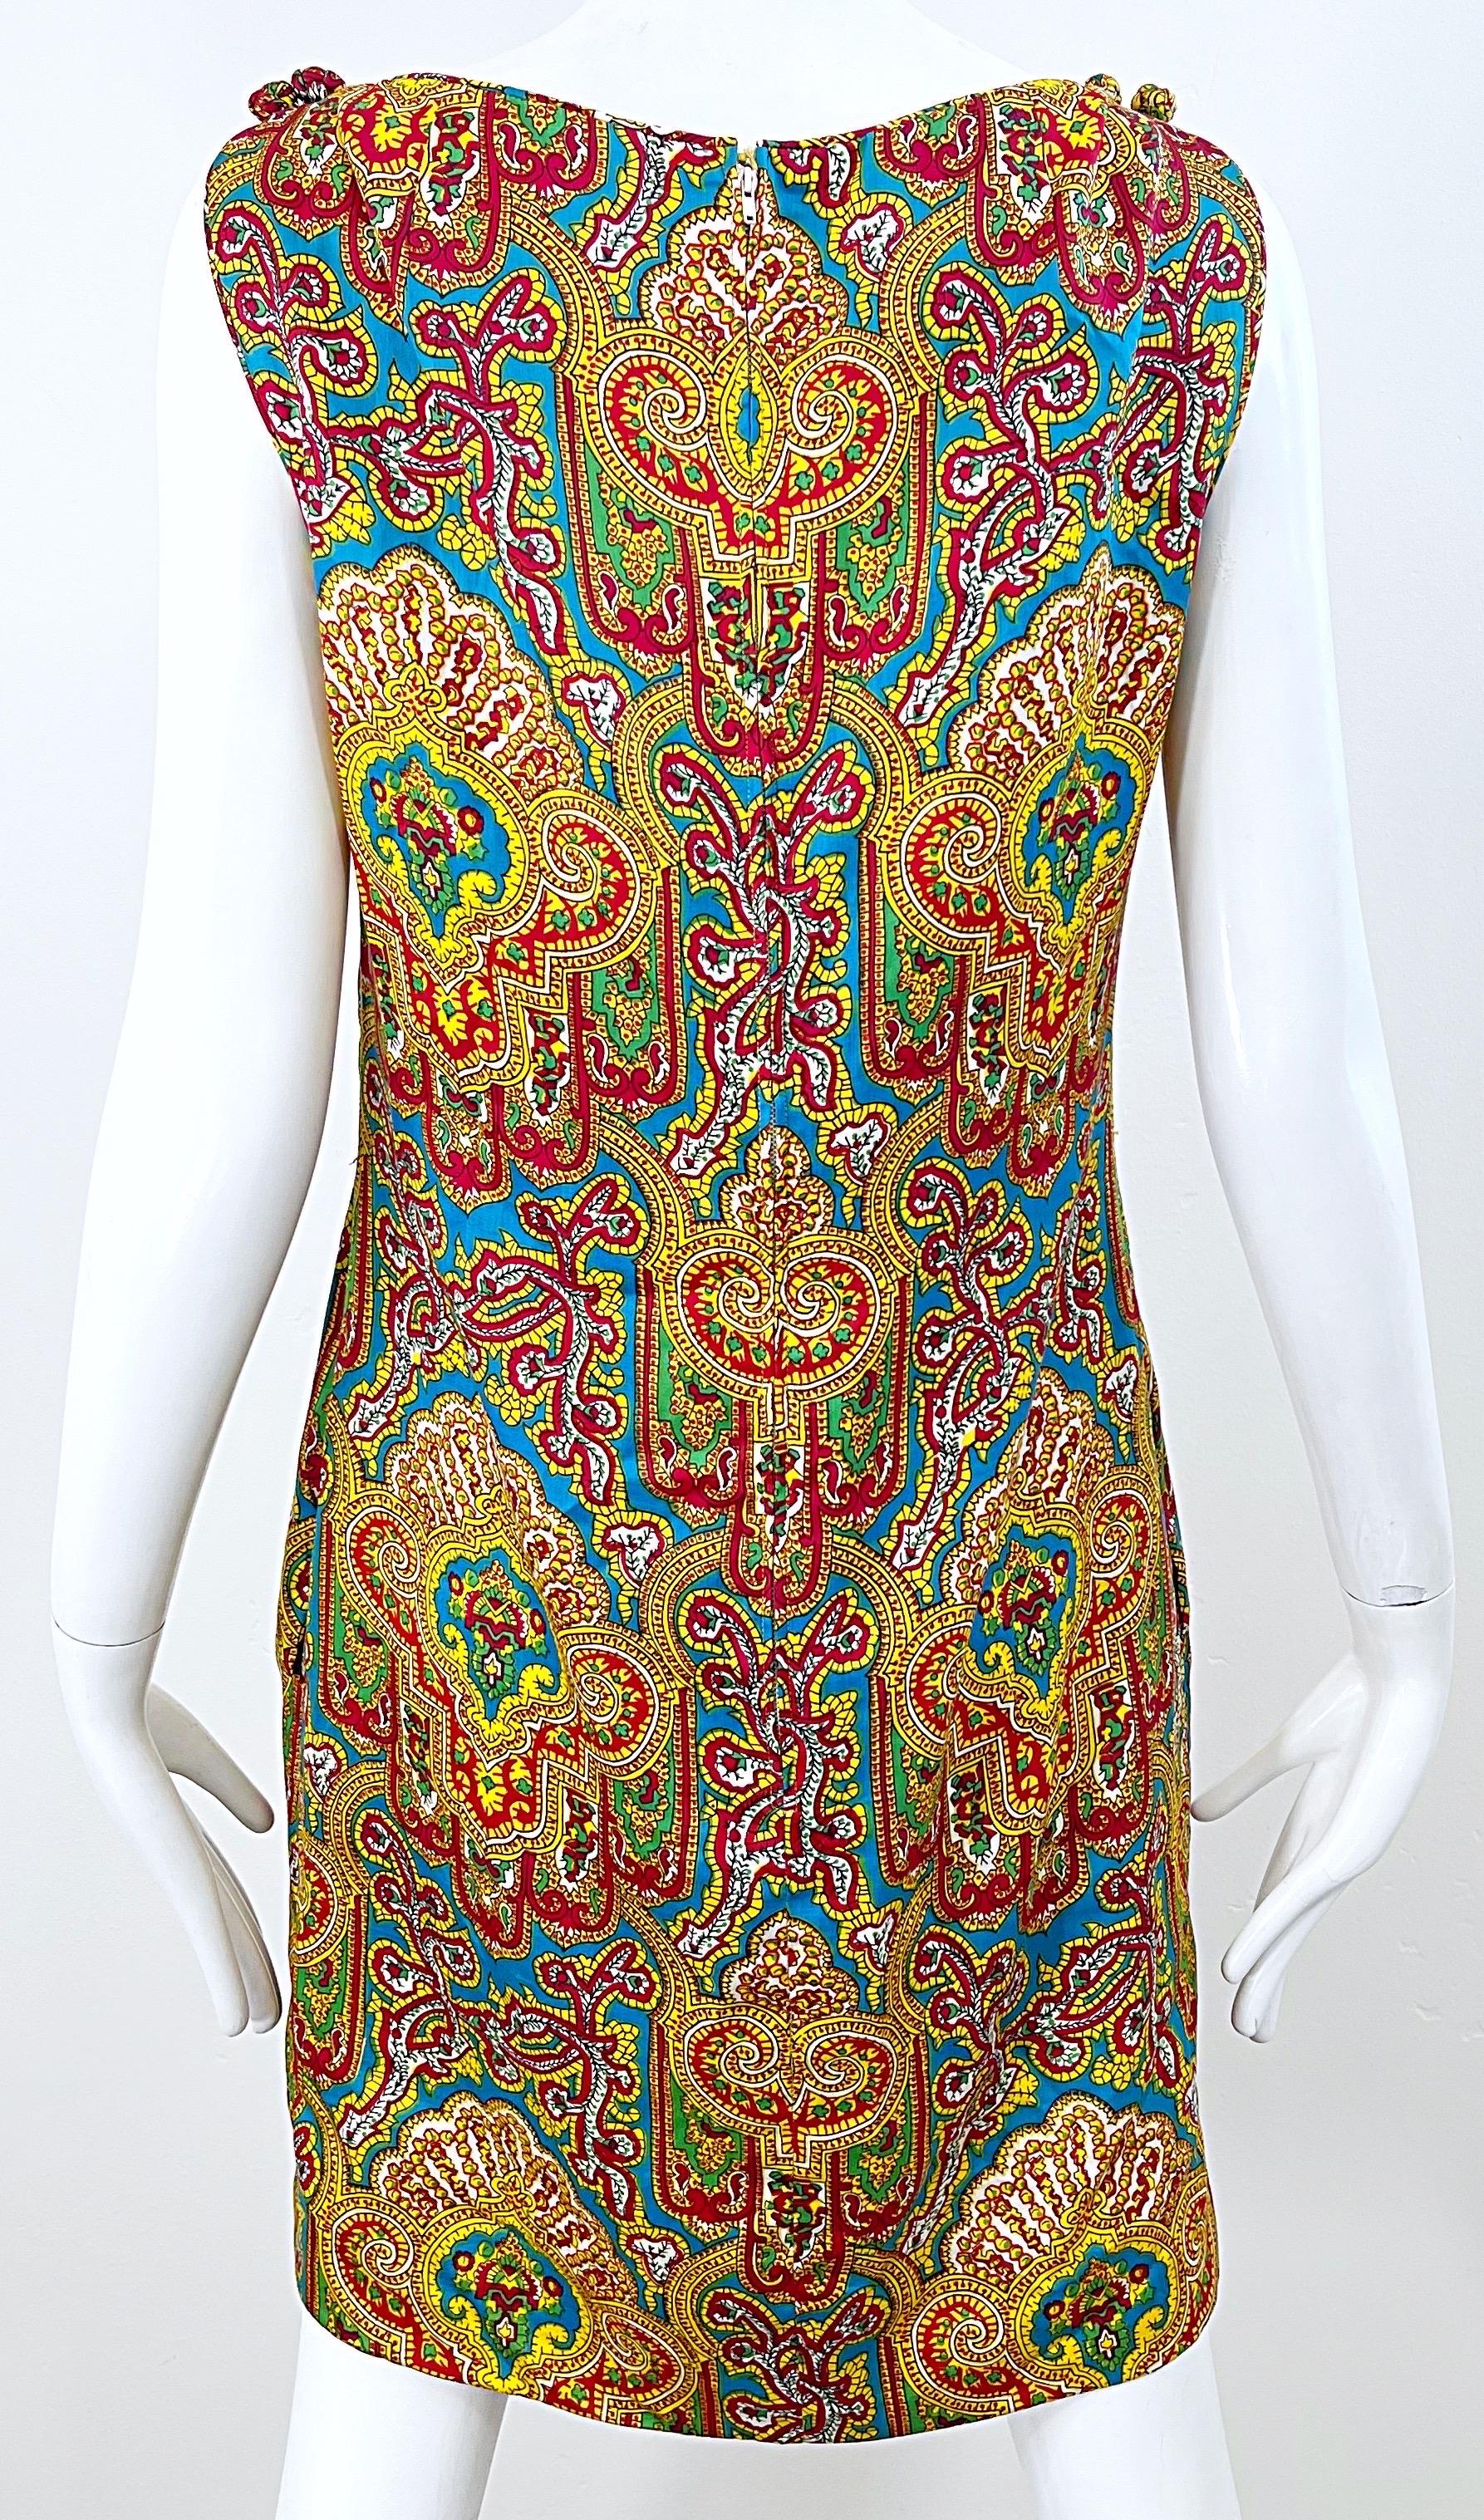 1960s Dynasty Paisley Bright Colorful Silk Vintage 60s Sleeveless Shift Dress In Excellent Condition For Sale In San Diego, CA